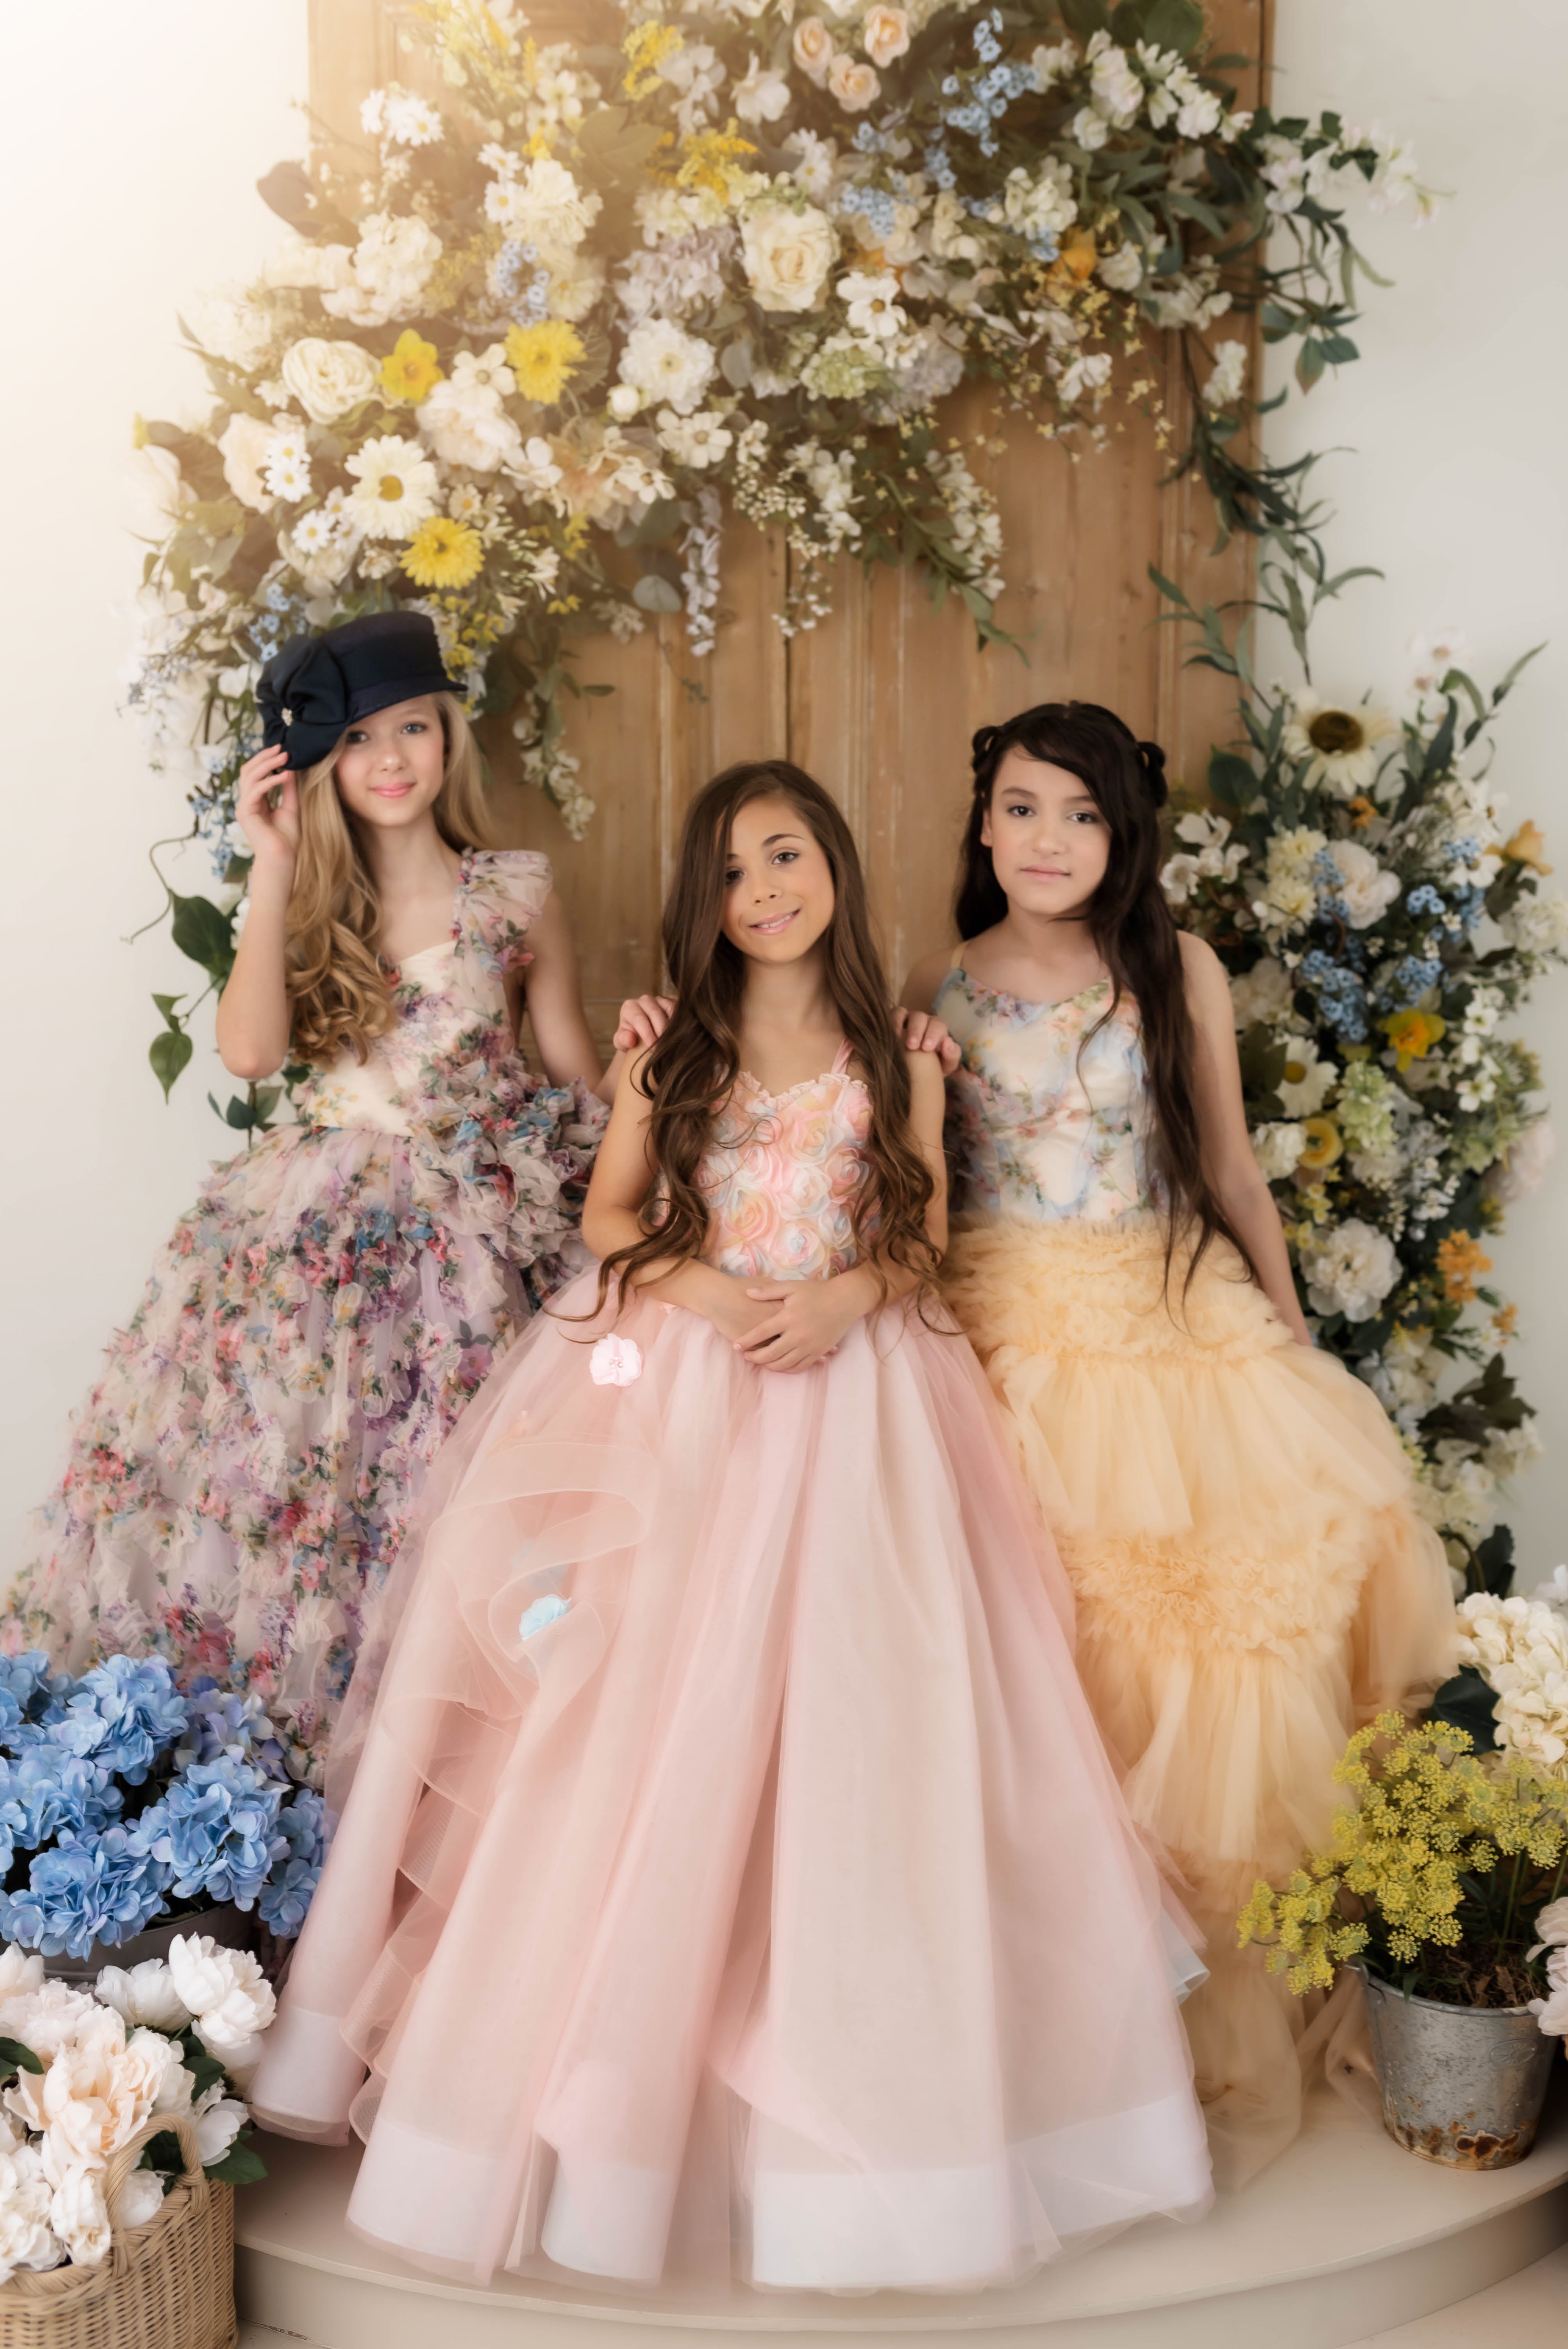 "MEADOW BLOOM" -Editorial Dress, Couture Gown, Special Occasion Dress Custom colors available